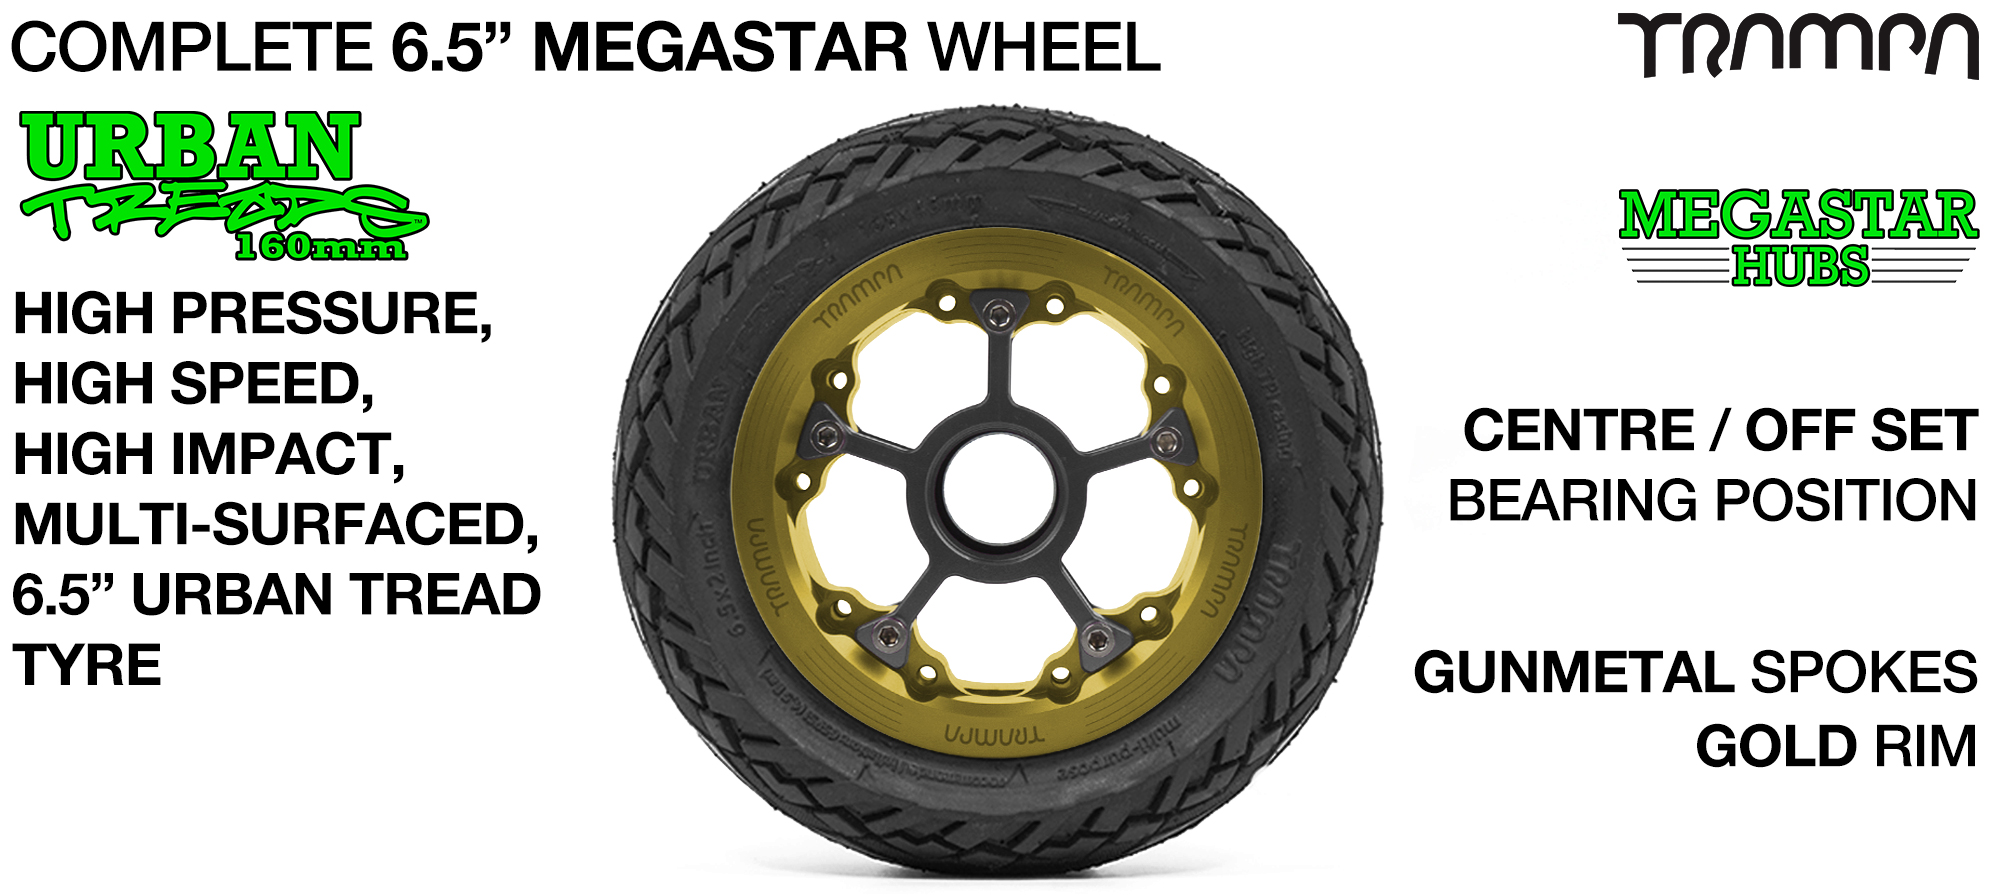 CENTER-SET MEGASTAR 8 Hub with GOLD Rims & GUNMETAL Spokes with the amazing Low Profile 6.5 Inch URBAN Treads Tyres